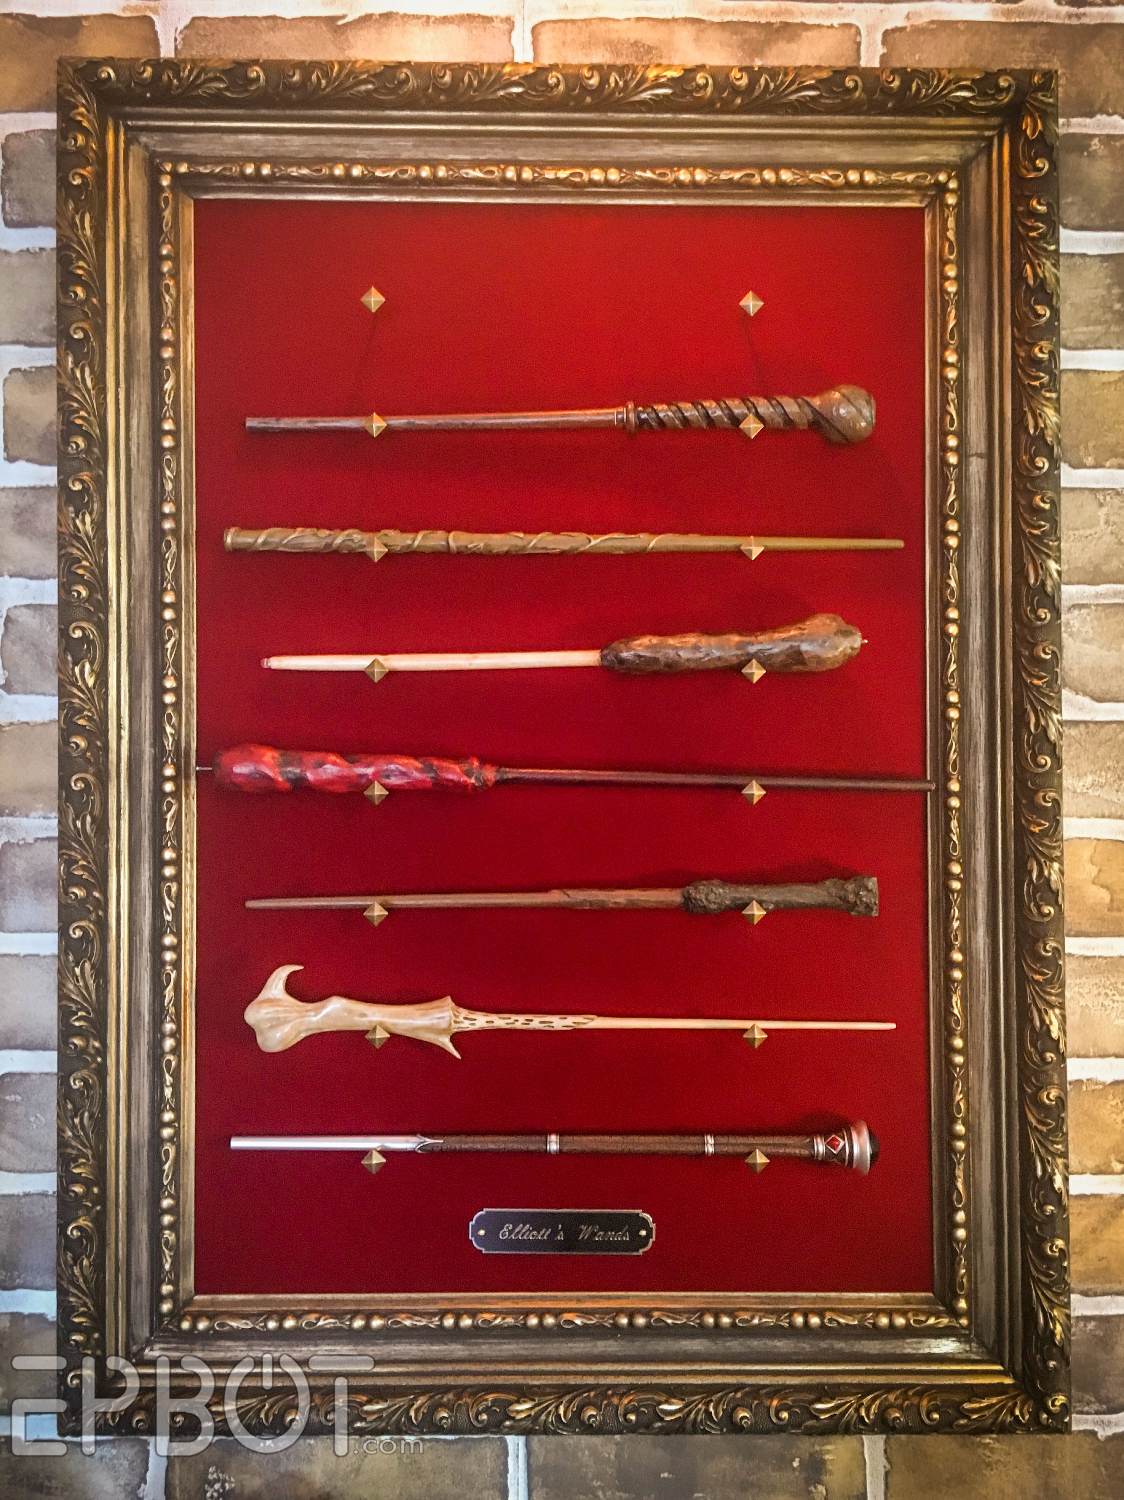 EPBOT Make Your Own Framed Wand Display Perfect for Wizarding World